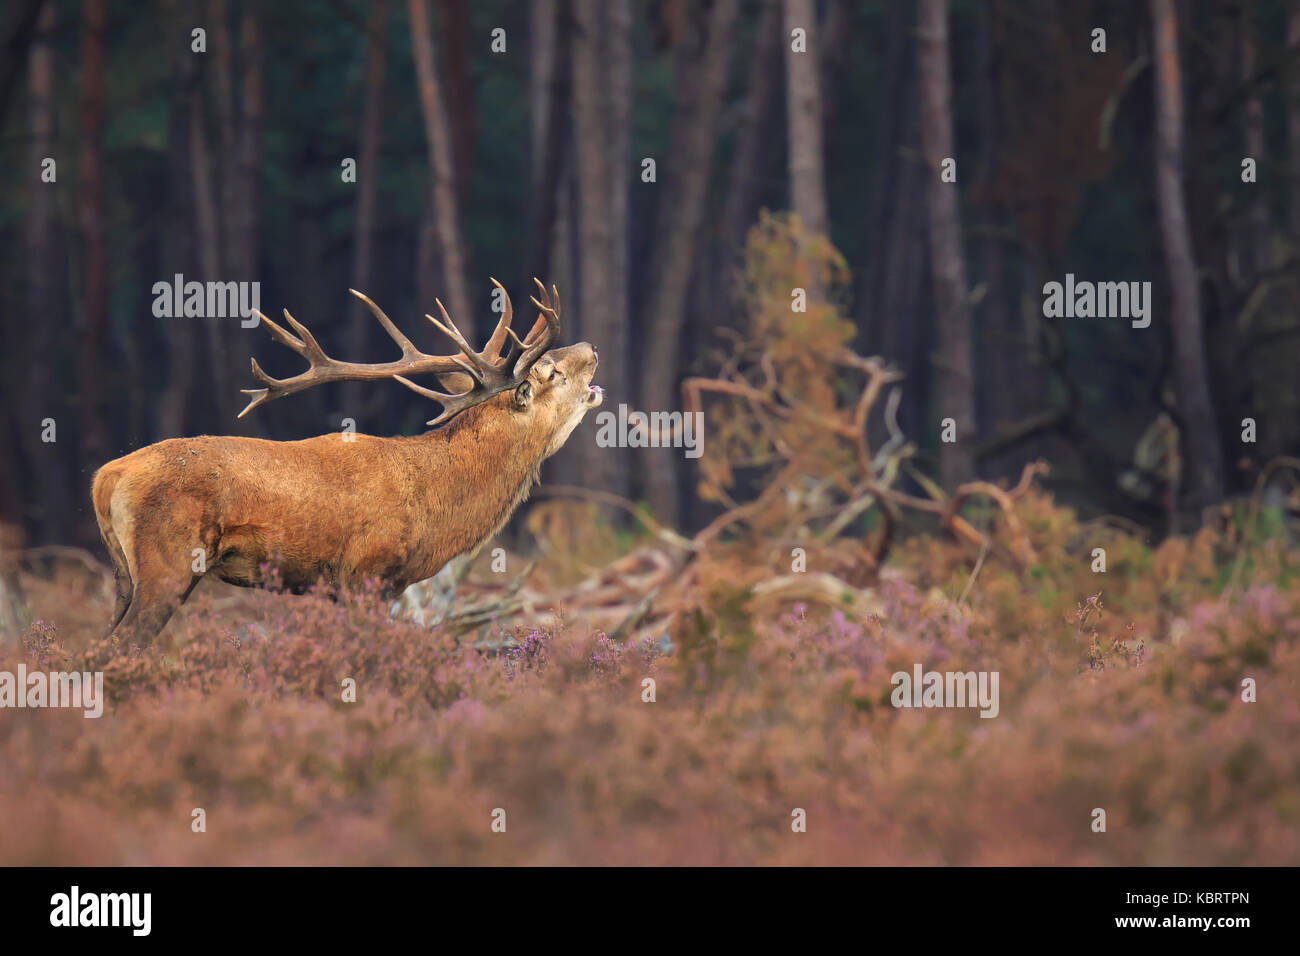 Red deer Cervus elaphus stag with big antlers roaring and rutting showing territorial behaviour during Autumn season. Stock Photo